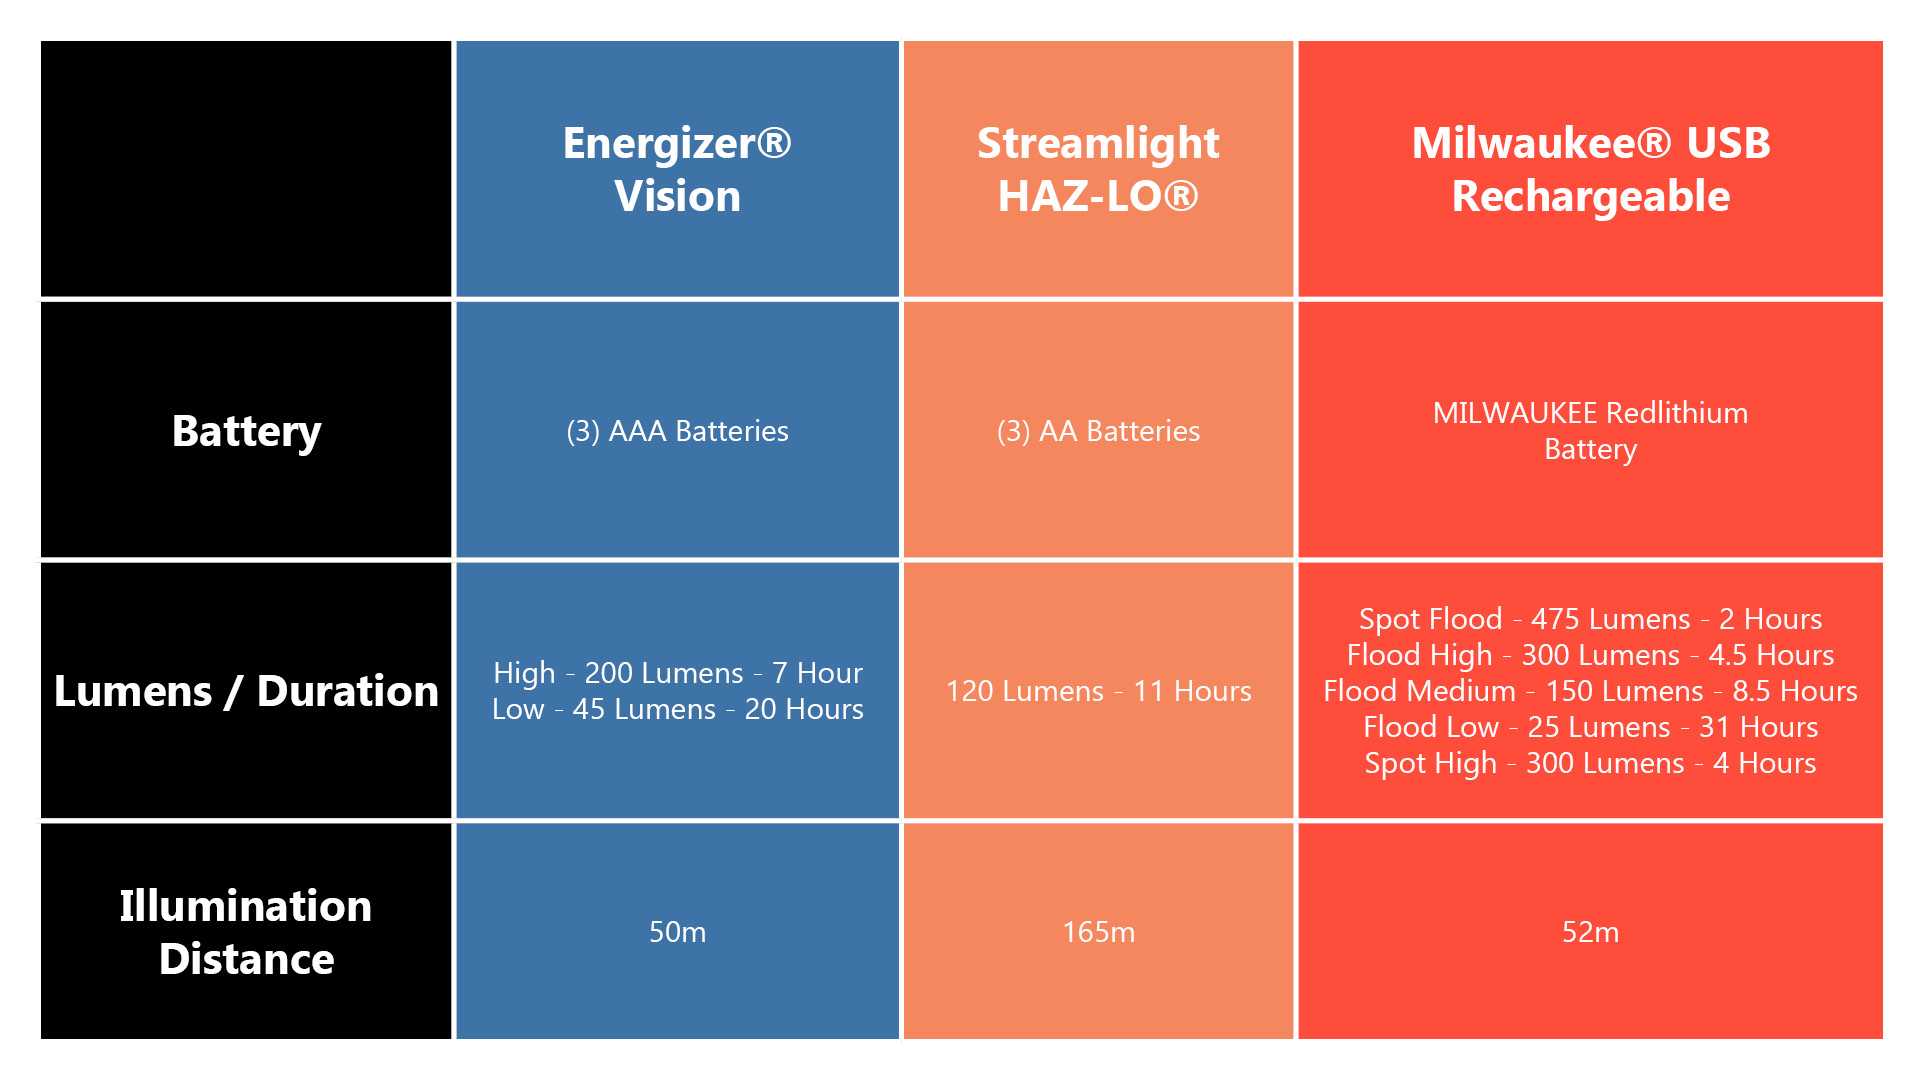 Specification comparison between 3 hands-free headlamps on Battery capability, lumen output, battery duration, and illumination distance